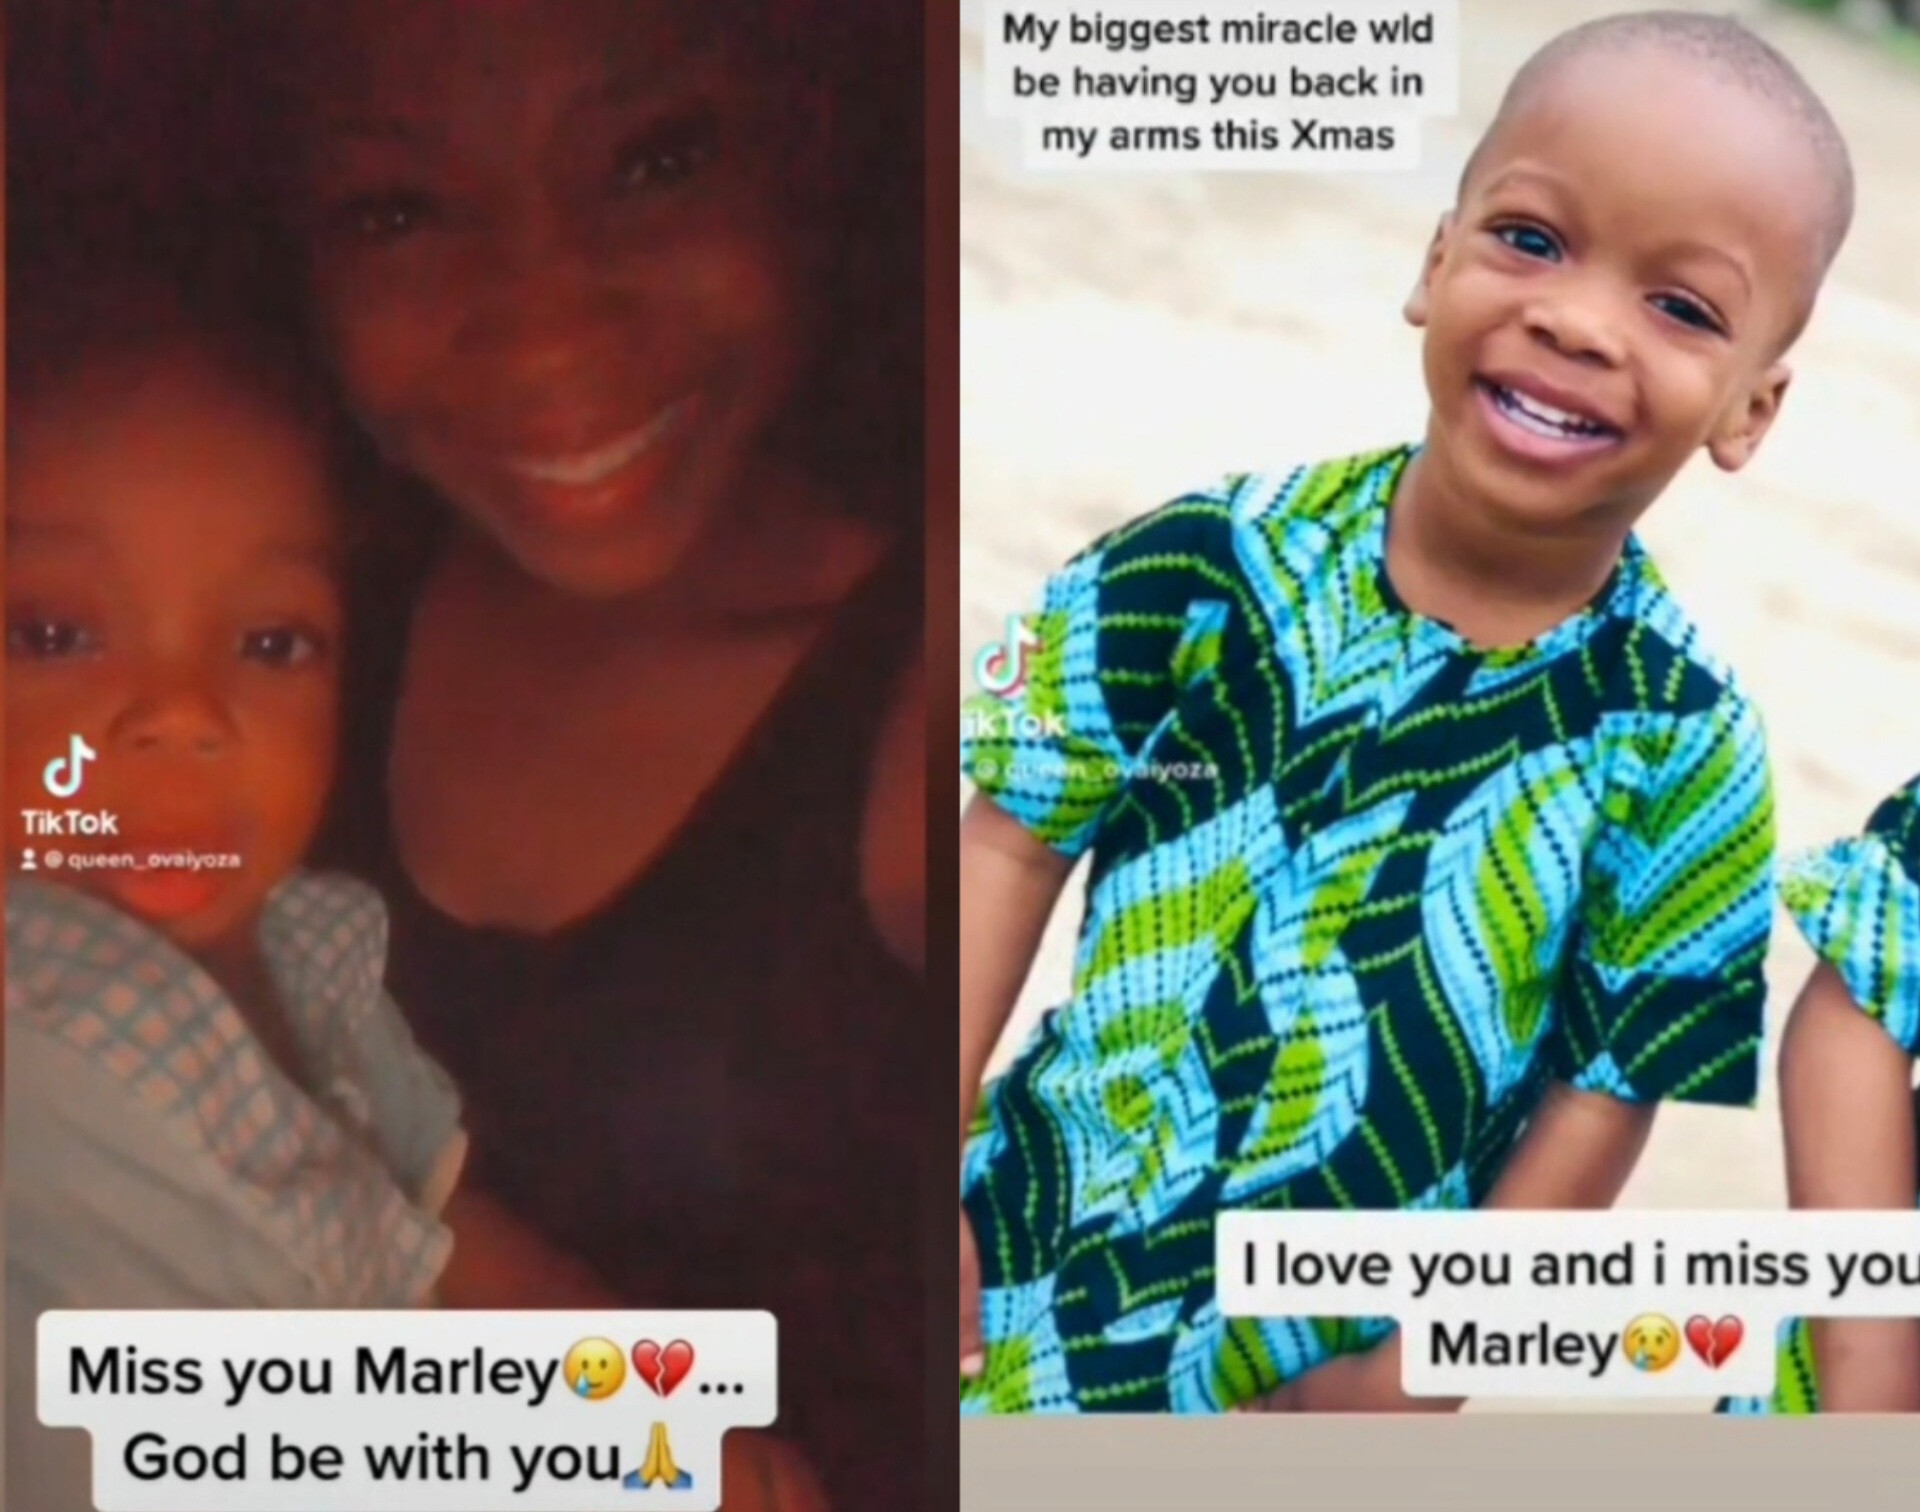 'My biggest miracle would be having you back in my arms this Christmas' - Mother of 2-year-old boy abducted in front of his grandmother's shop says